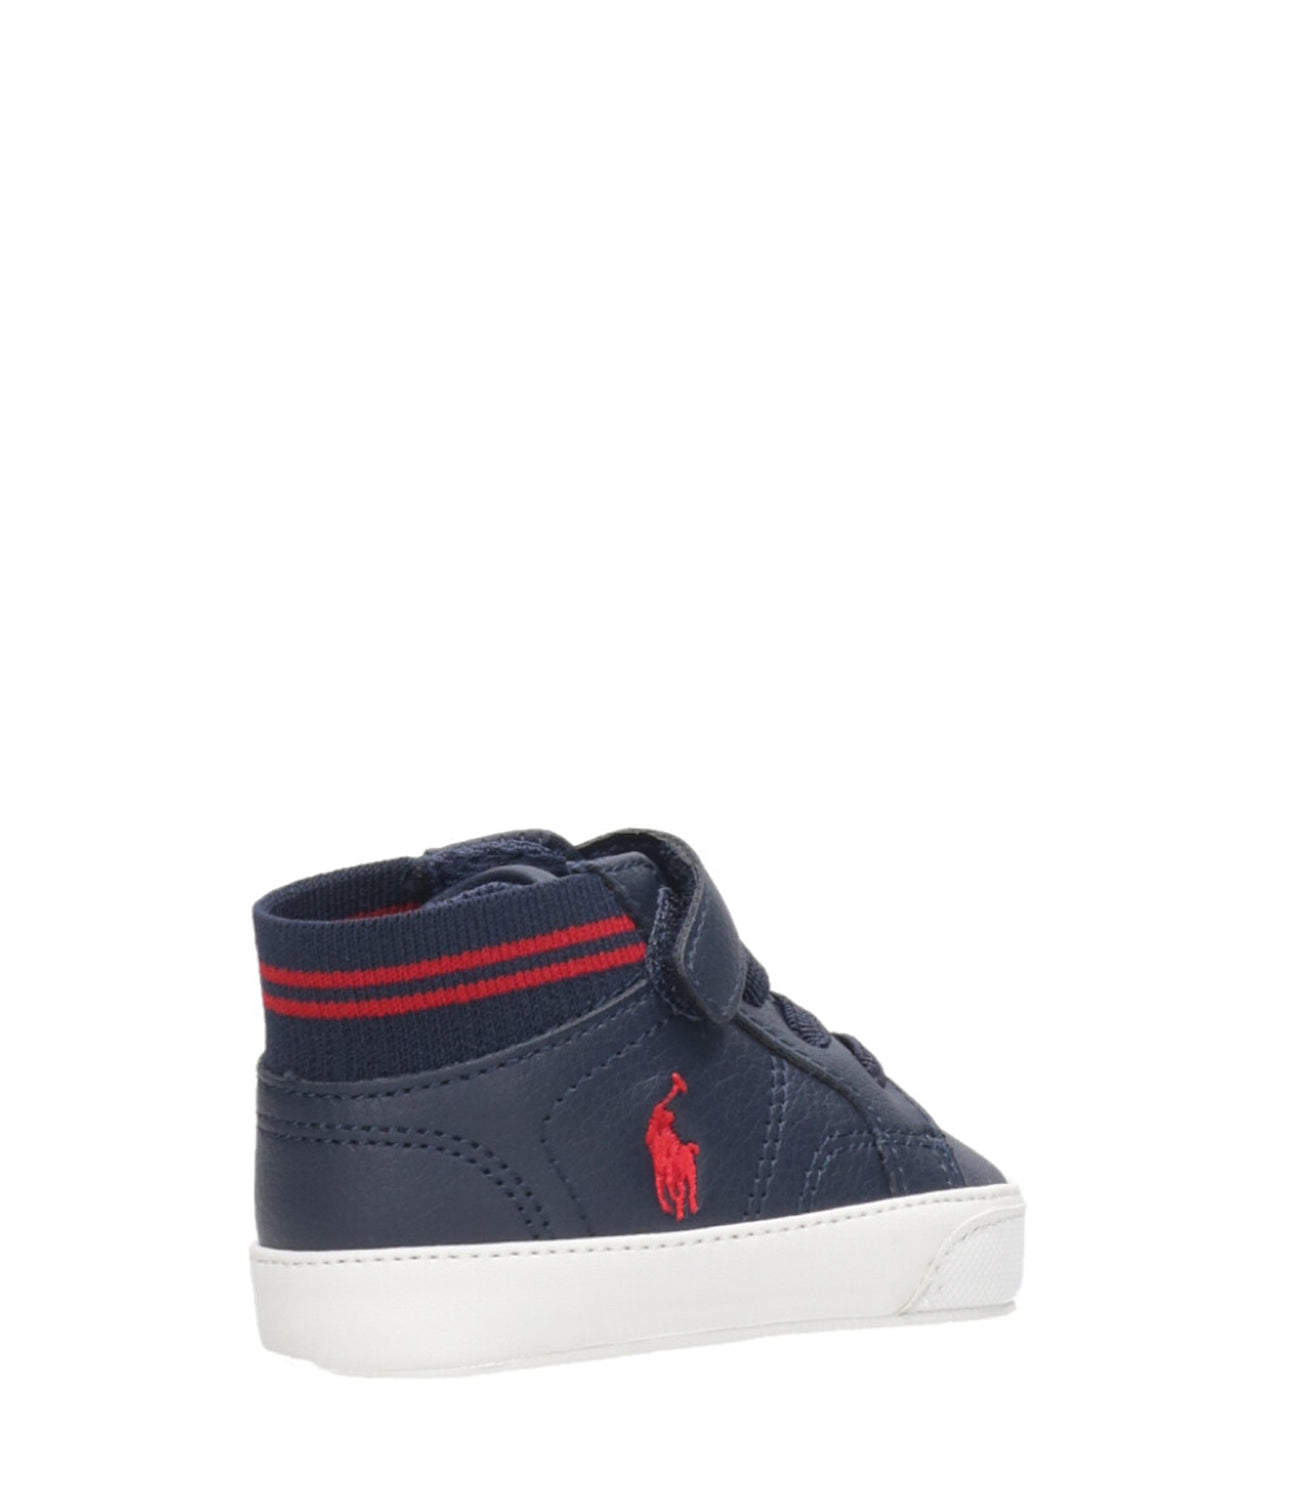 Ralph Lauren Childrenswear | High Sneakers Theron Boot Navy Blue and Red